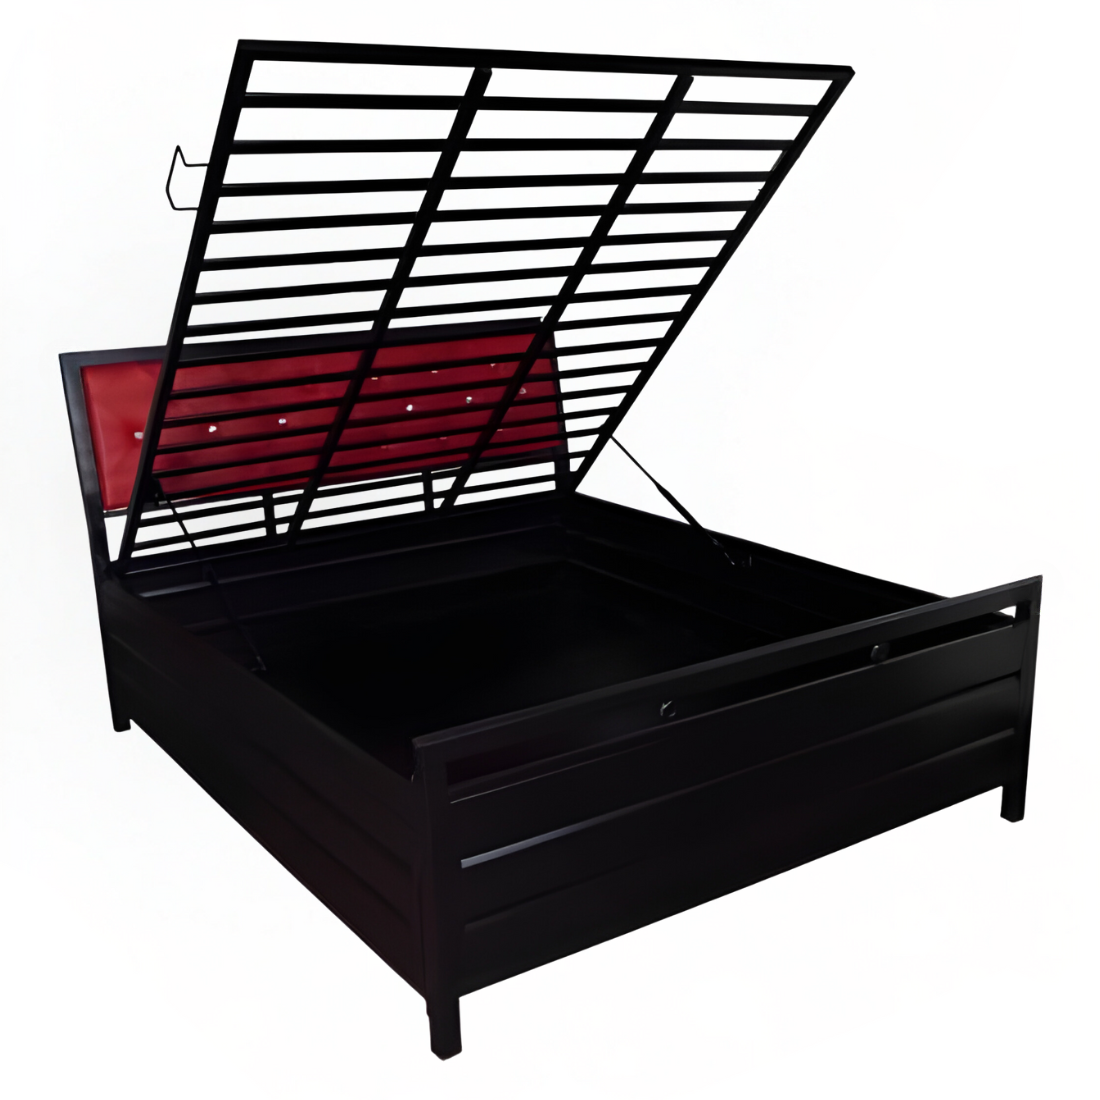 Heath Hydraulic Storage King Metal Bed with Red Cushion Headrest (Color - Black)